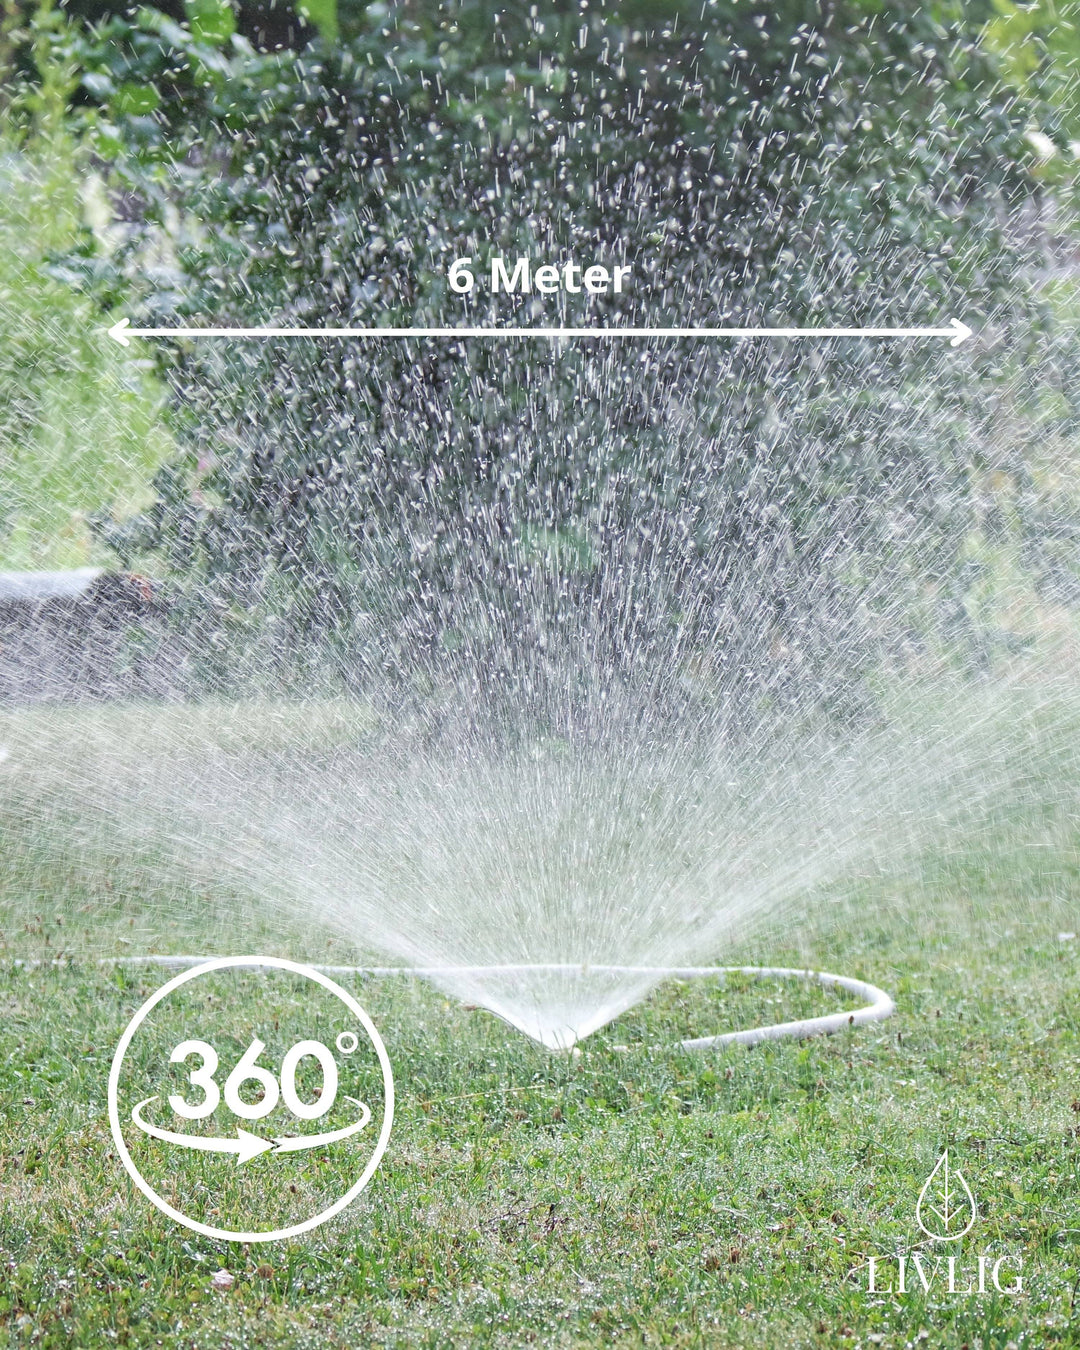 a sprinkler is spraying water on a lawn